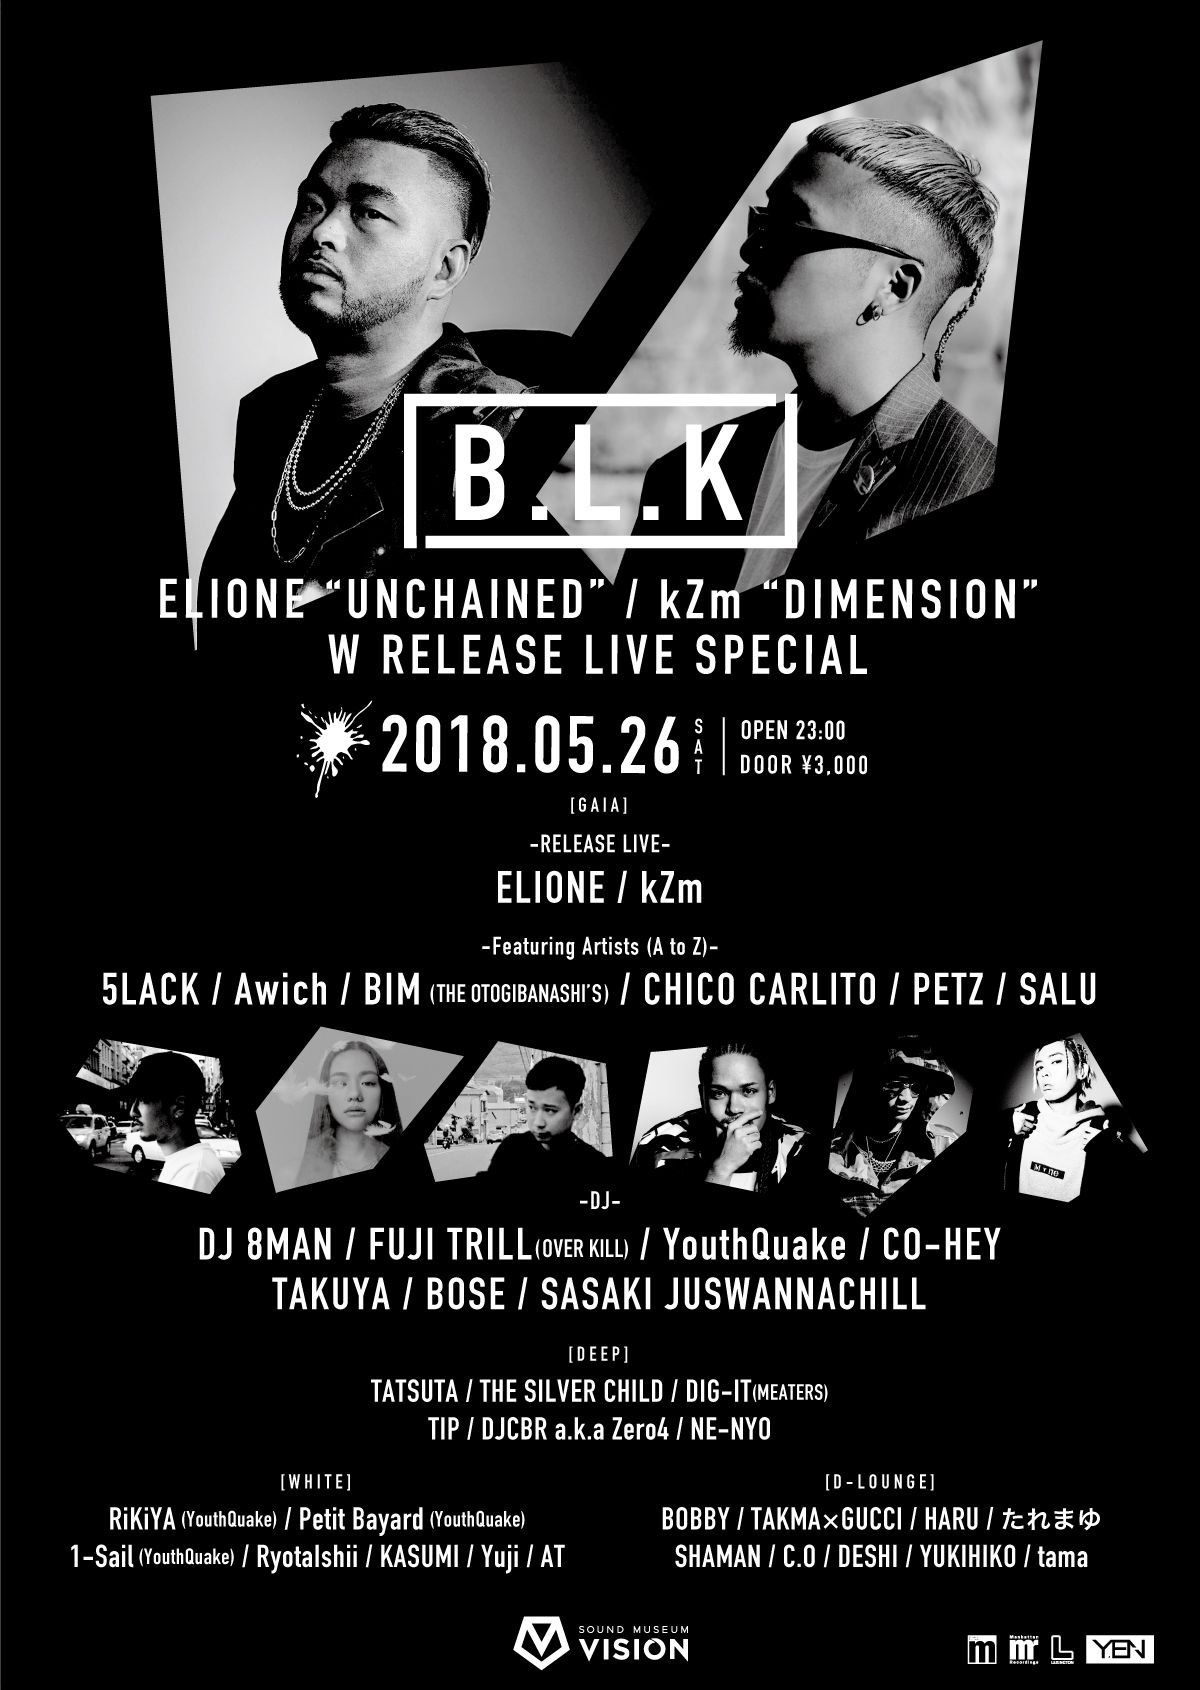 B.L.K ELIONE"UNCHAINED" / kZm"DIMENSION"  W RELEASE LIVE SPECIAL